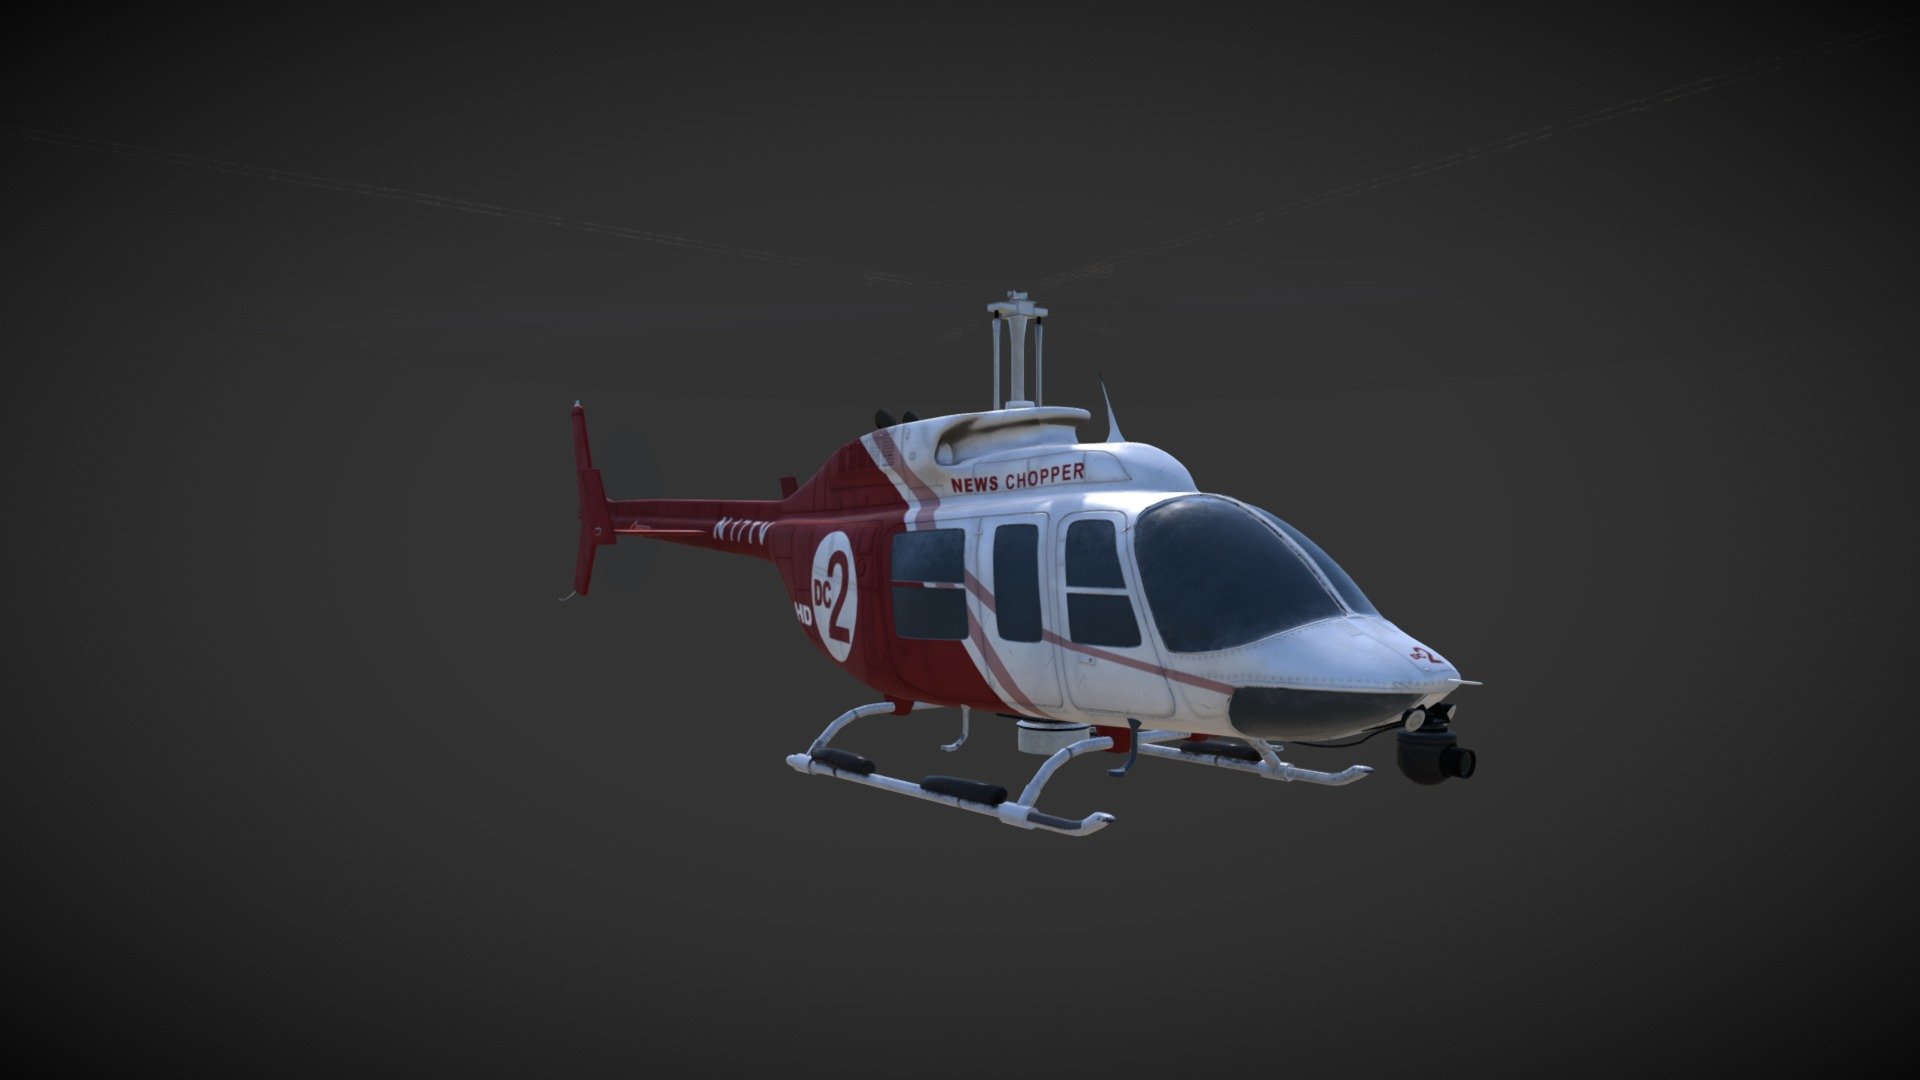 Helicopter used in a recent aircraft accident animation. Modeled and rigged in 3ds Max, textured in Quixel, and rendered in Unity - DC News helicopter - 3D model by KyleConwayArt (@kconway727) 3d model